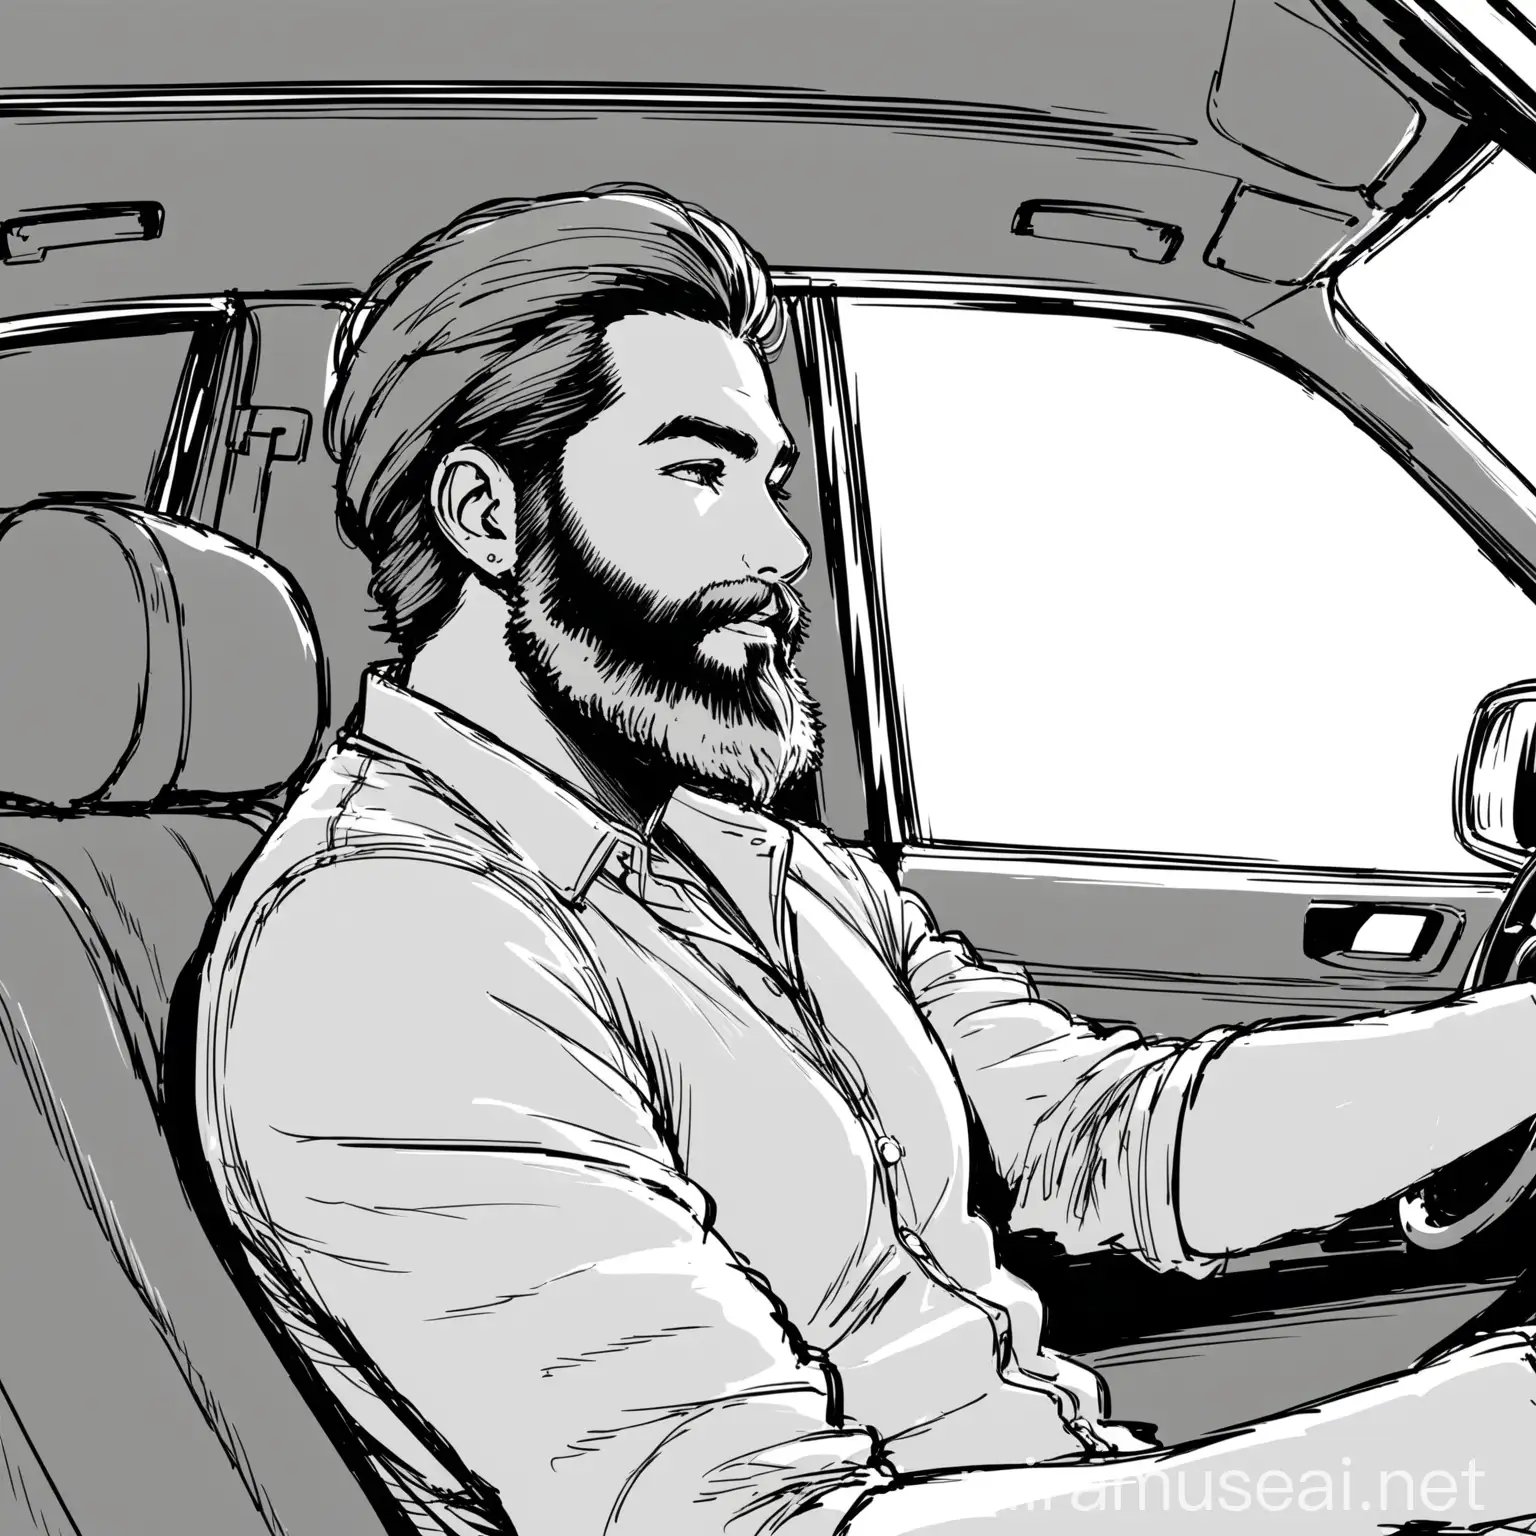 Man with beard sitting in a car and enjoys music. Outline sketch